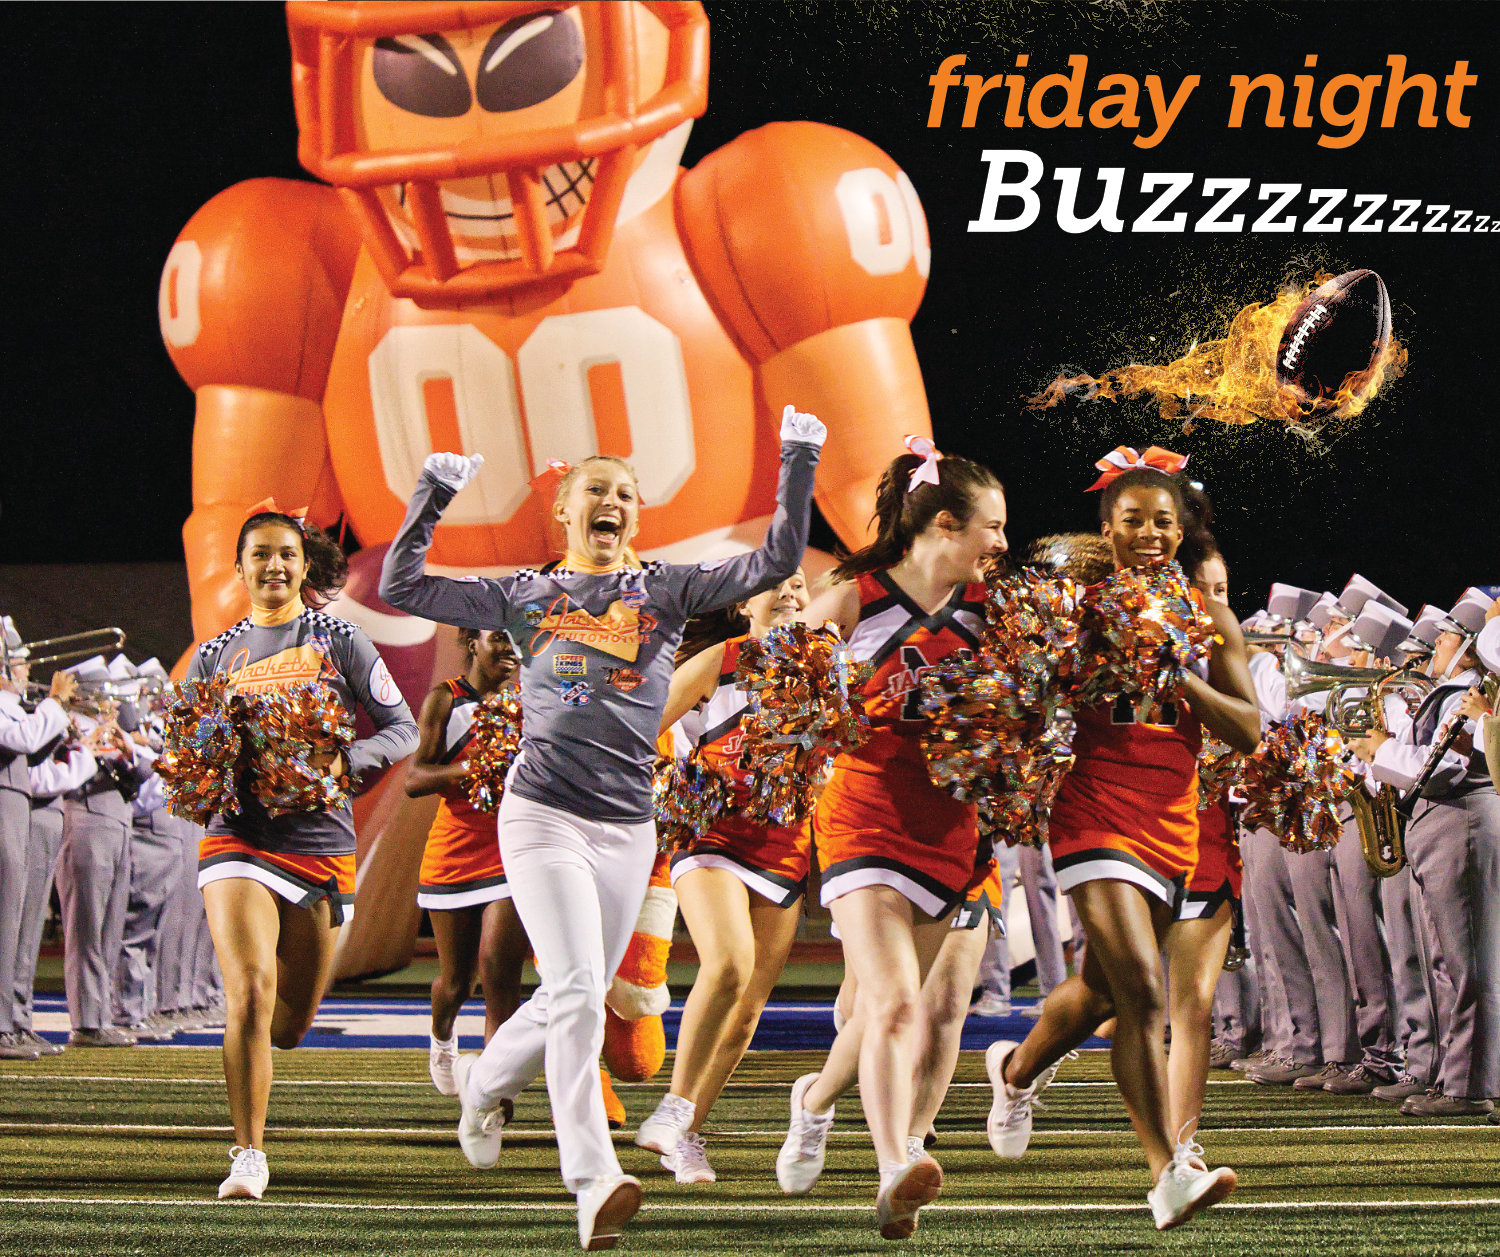 Despite Mineola’s season opening loss to Wills Point, there was plenty of spirit backing the Yellowjackets on Friday. From left, Valerie Garcia, Tristan Kirk, Karsyn Banks, and Abby Kratzmeyer cheer the ‘Jackets into the second half as the Sound of the Swarm plays the fight song.

(full coverage and photos of the game)